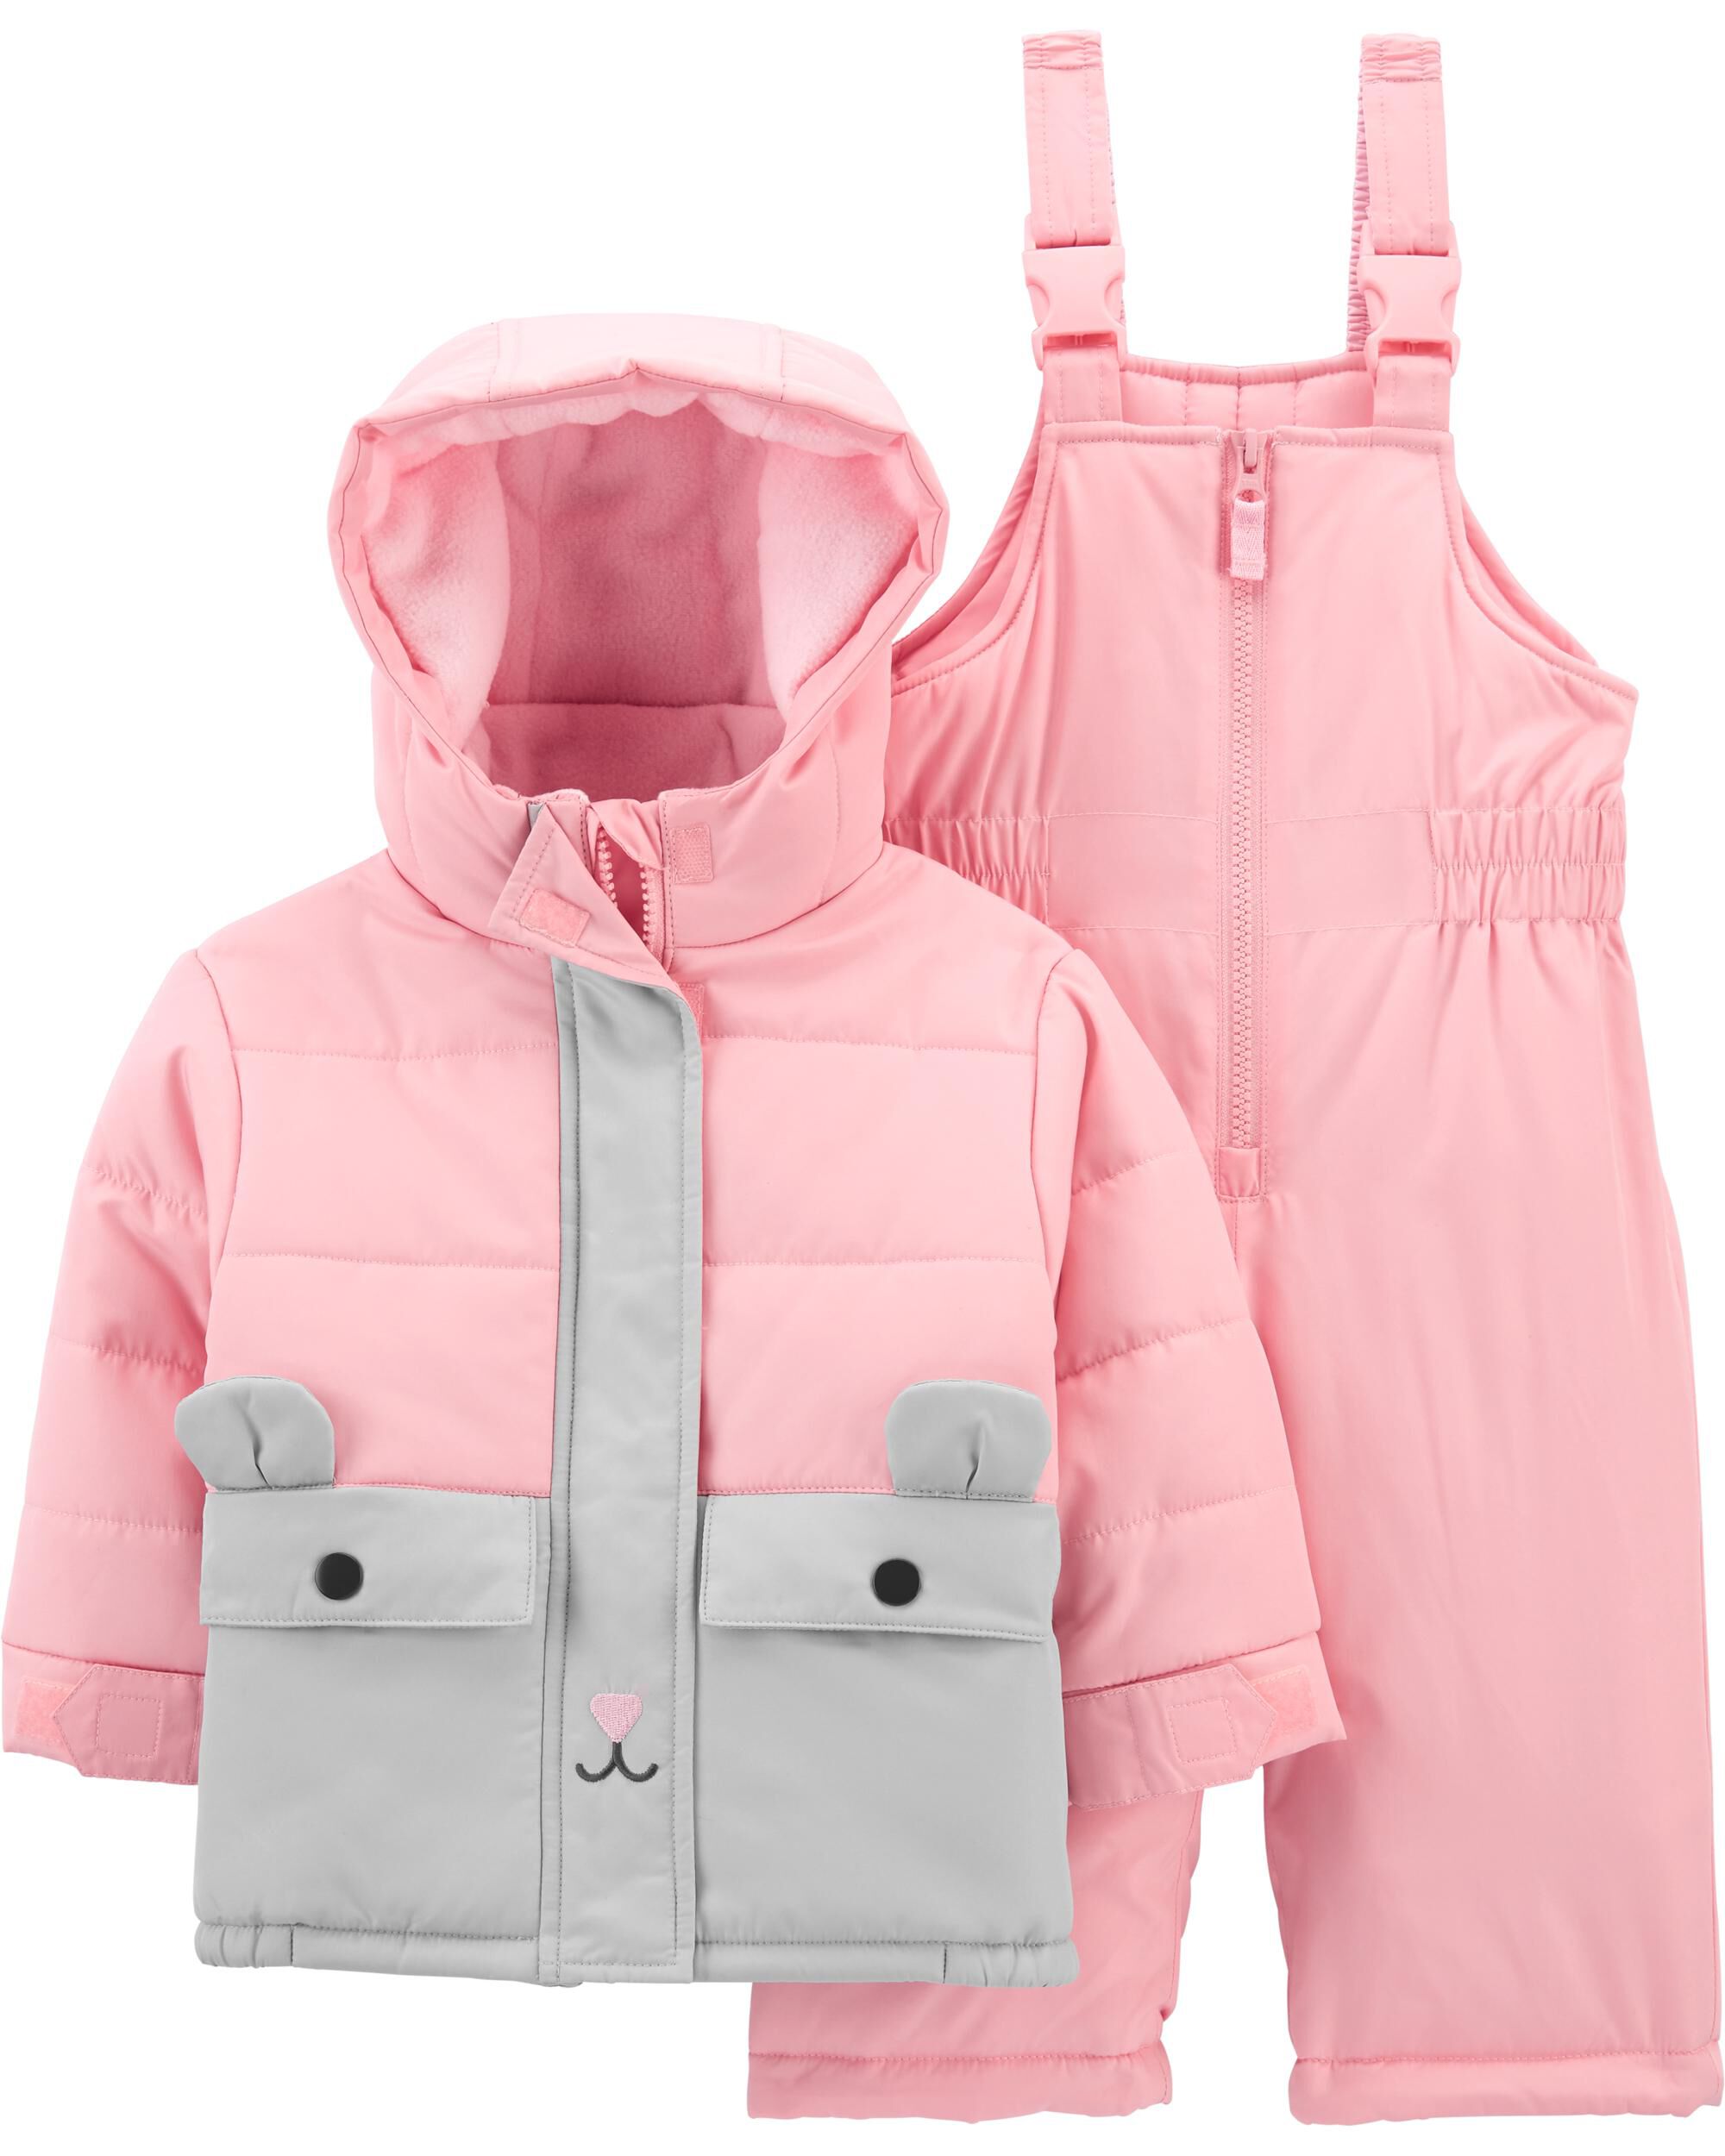 baby girl jacket 12 months